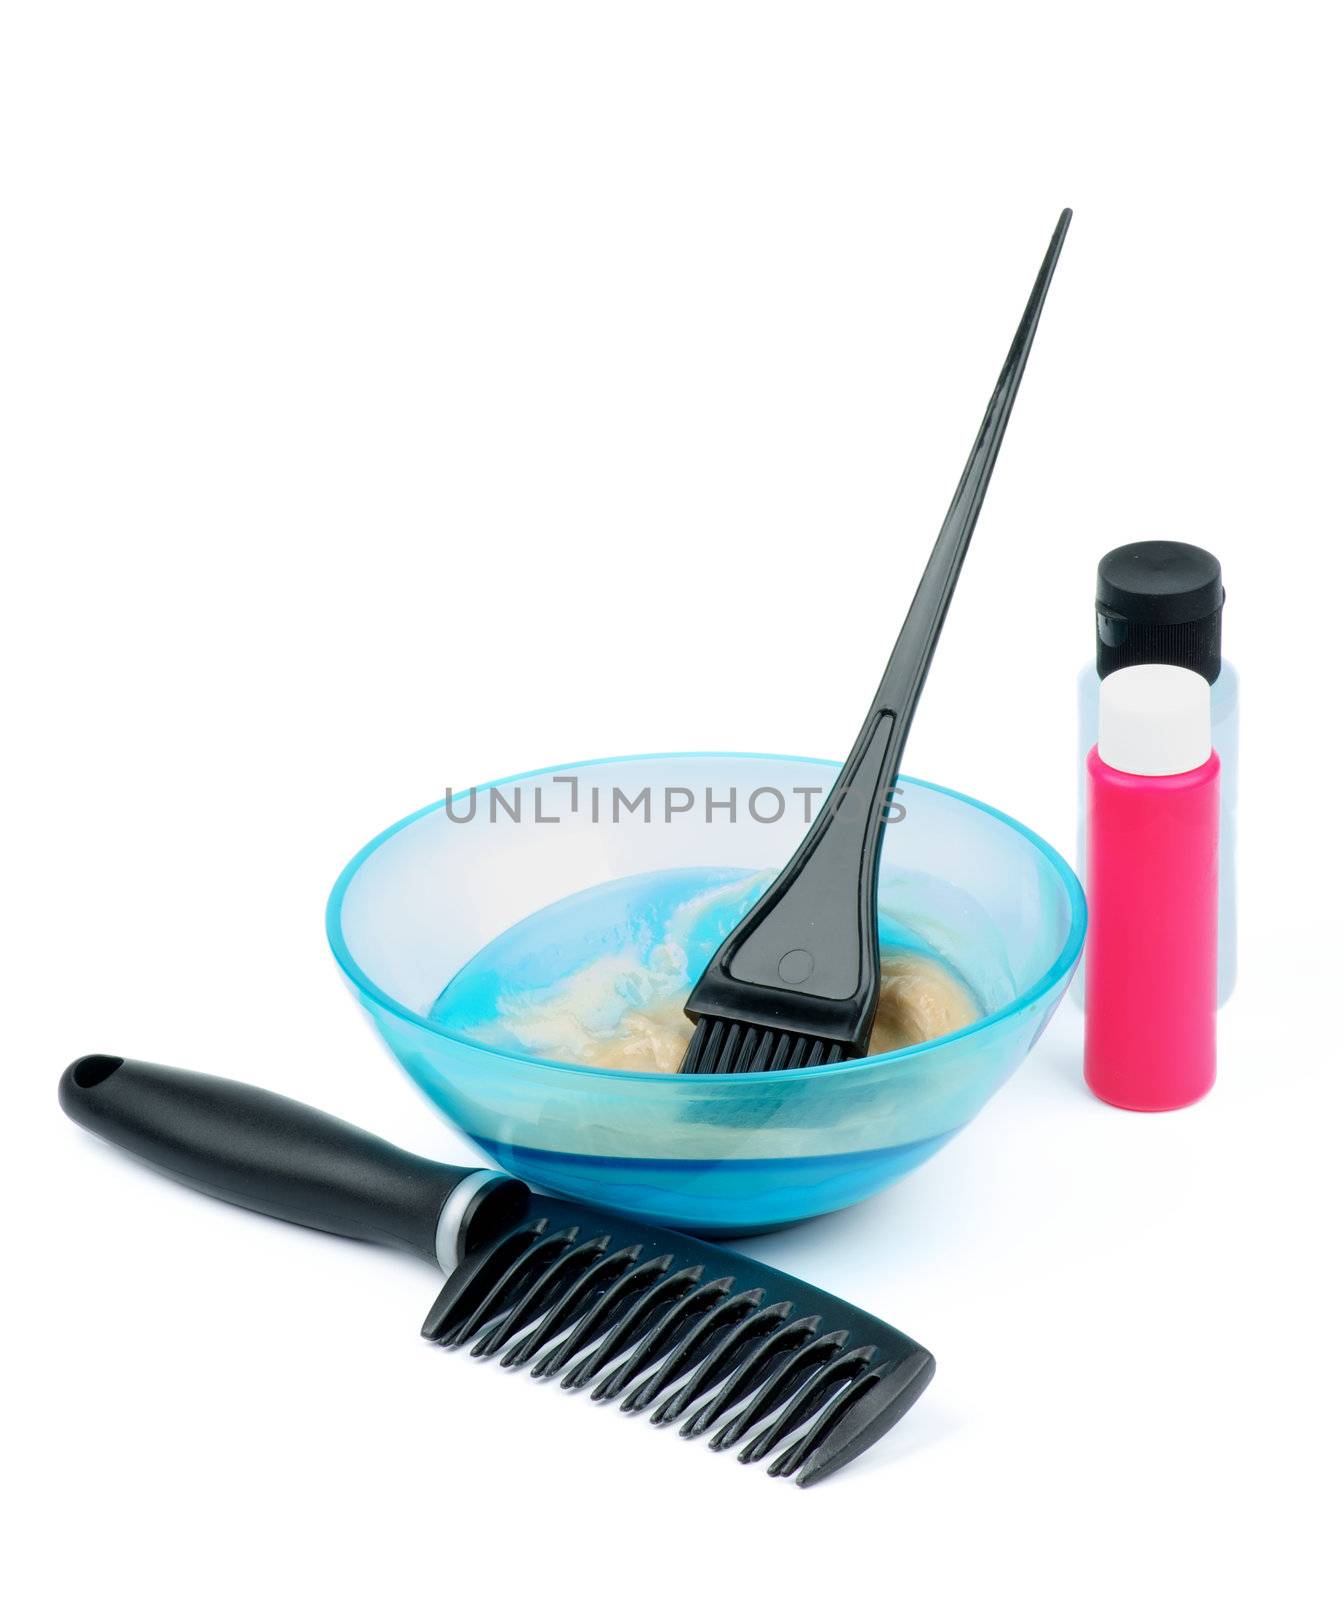 Hair Coloring Set with Hair Dye, Paintbrush, Hairbrush, Paint Containers isolated on white background